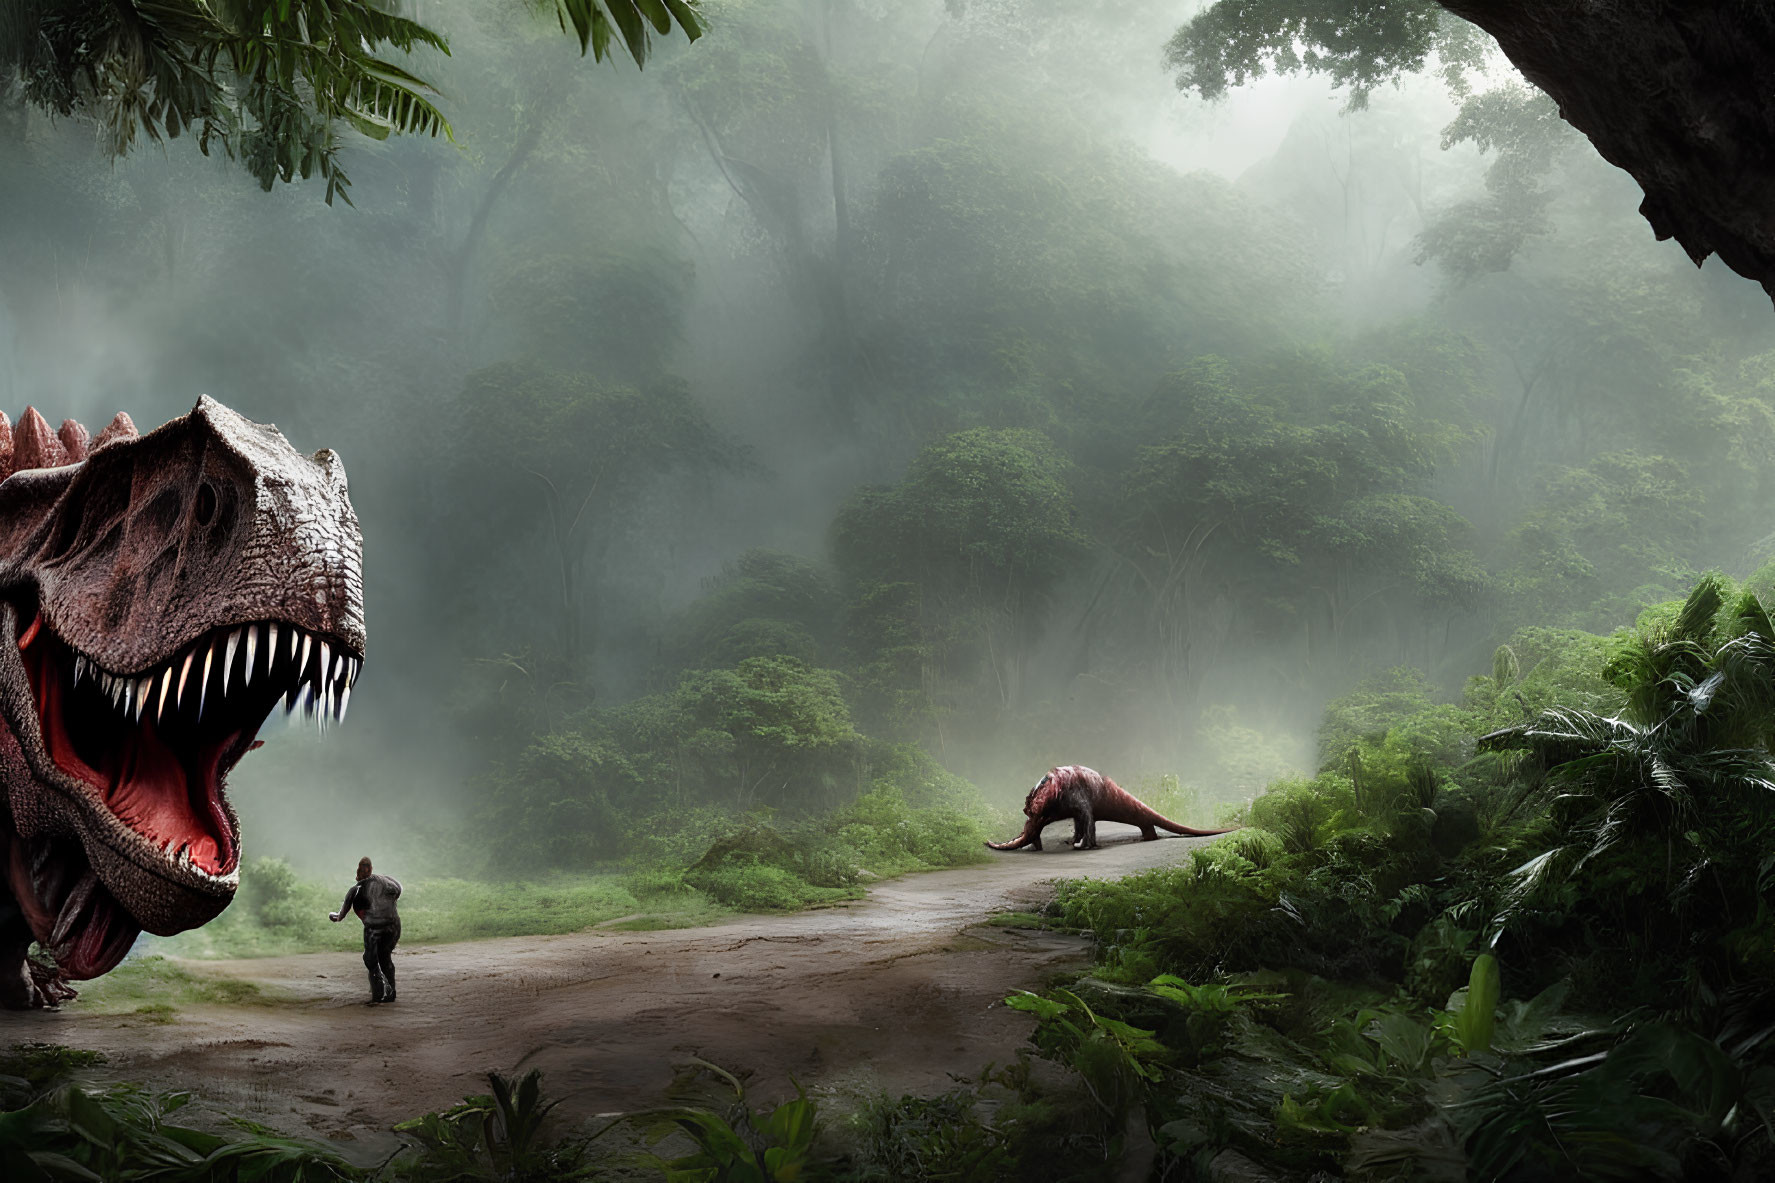 Encounter: Person confronts giant dinosaur in misty jungle